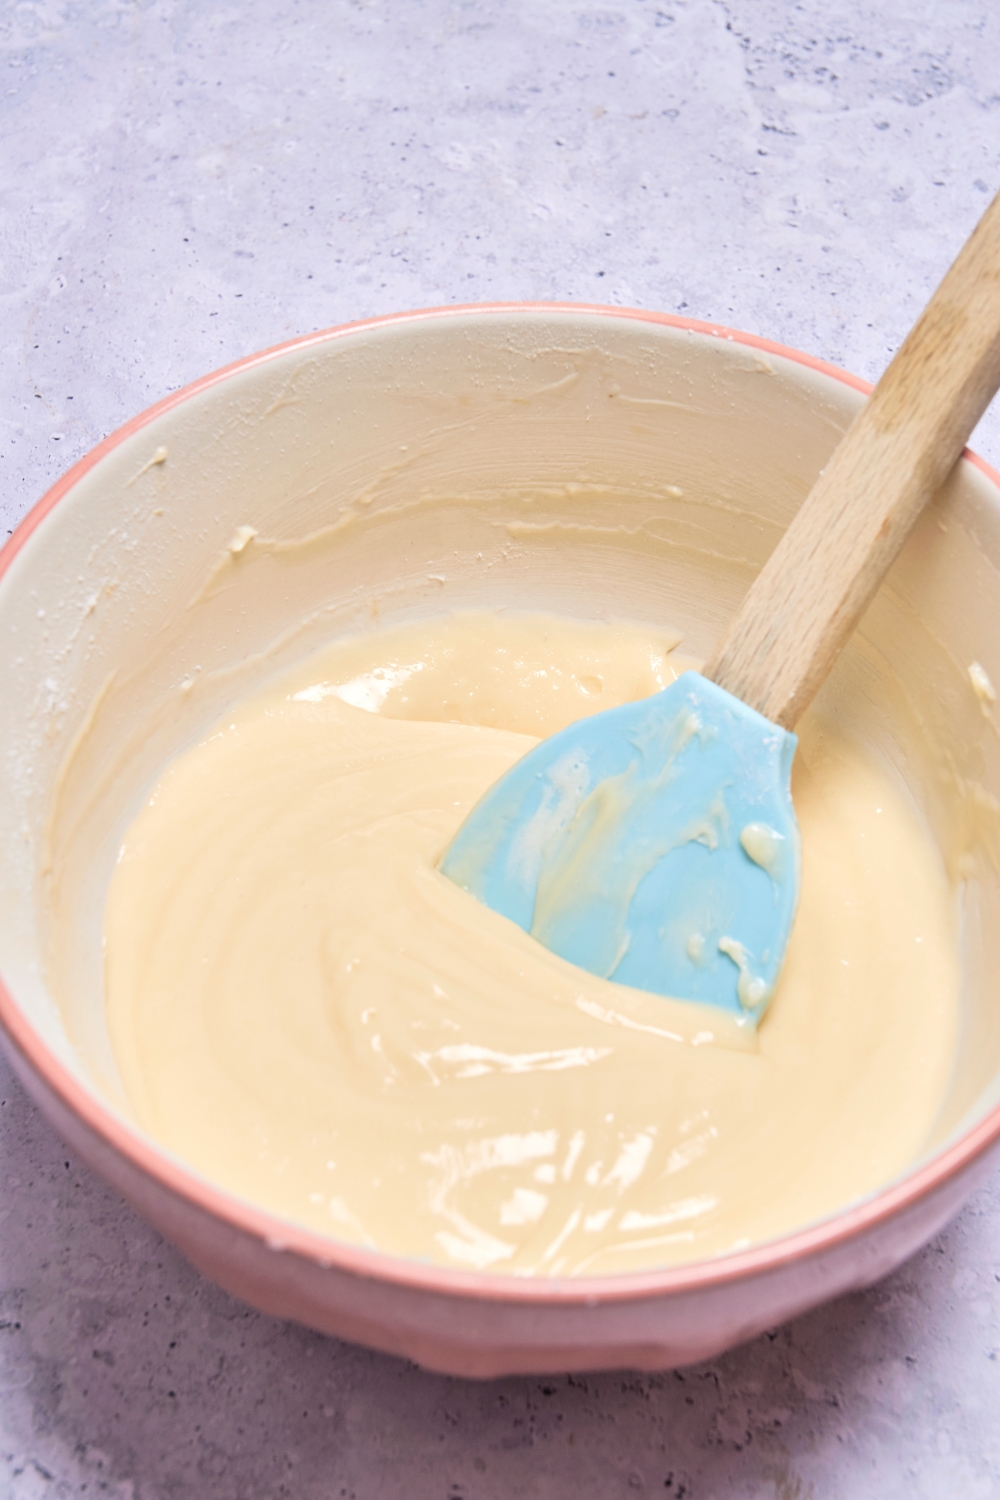 A mixing bowl with cream cheese frosting.